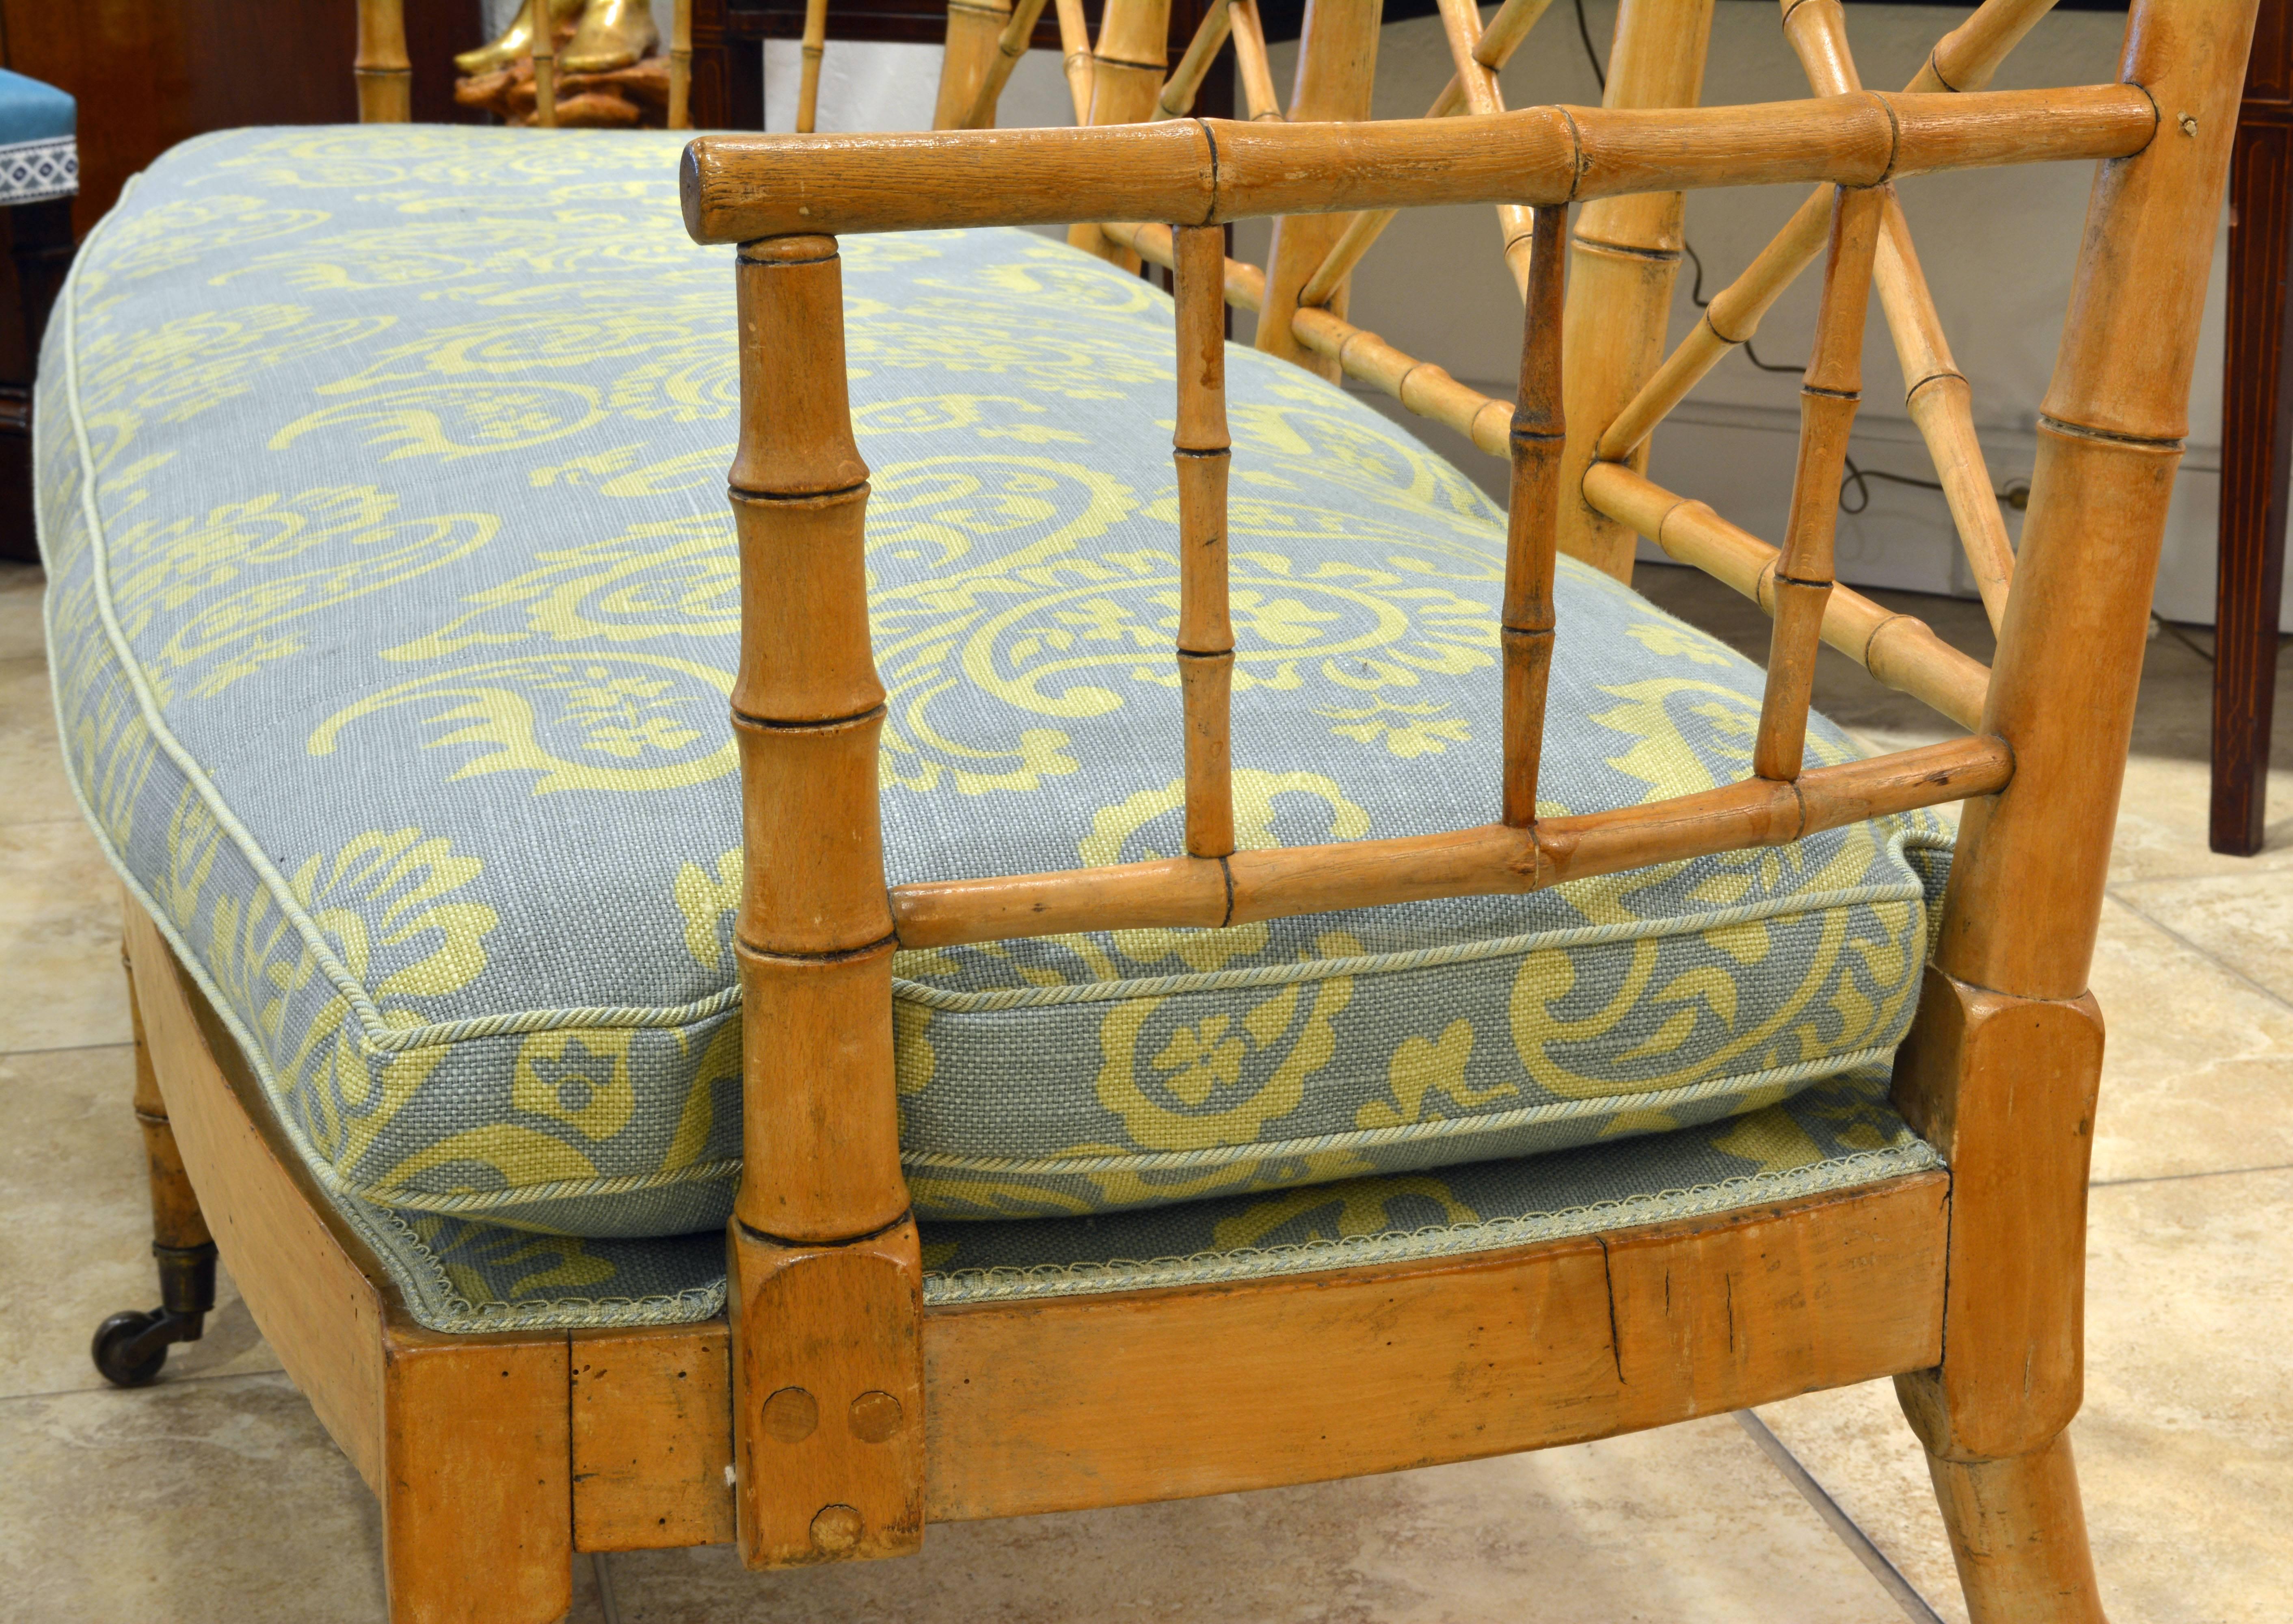 19th Century Fine English Regency Period Faux Bamboo Settee or Bench with Upholstered Seat